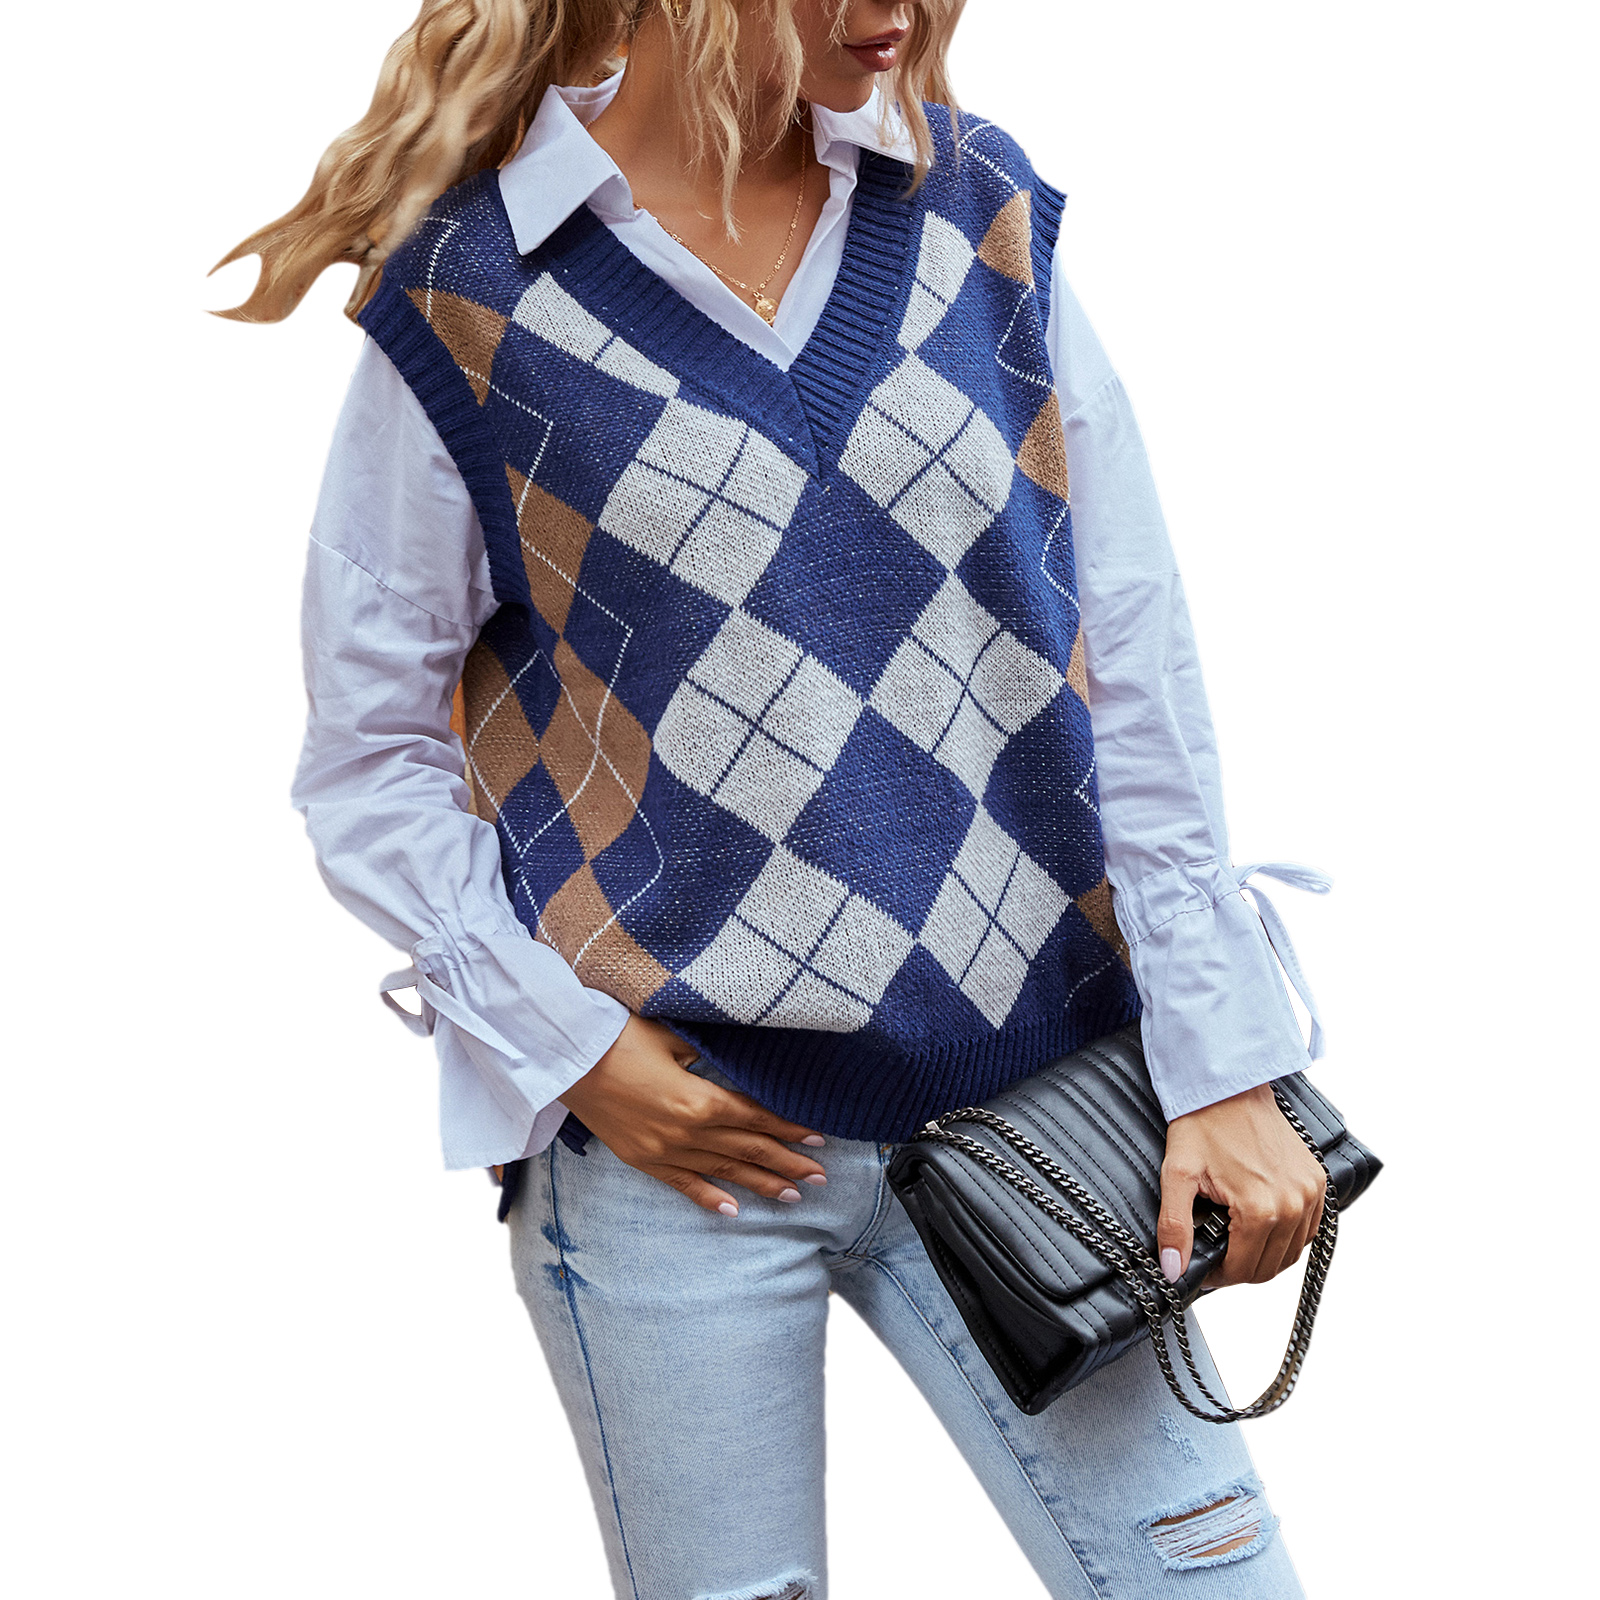 https://d3thqe68ymbqps.cloudfront.net/1428015-large_default/argyle-plaid-knitted-tank-top-female-knitwear-preppy-style-clothes-v-n.jpg